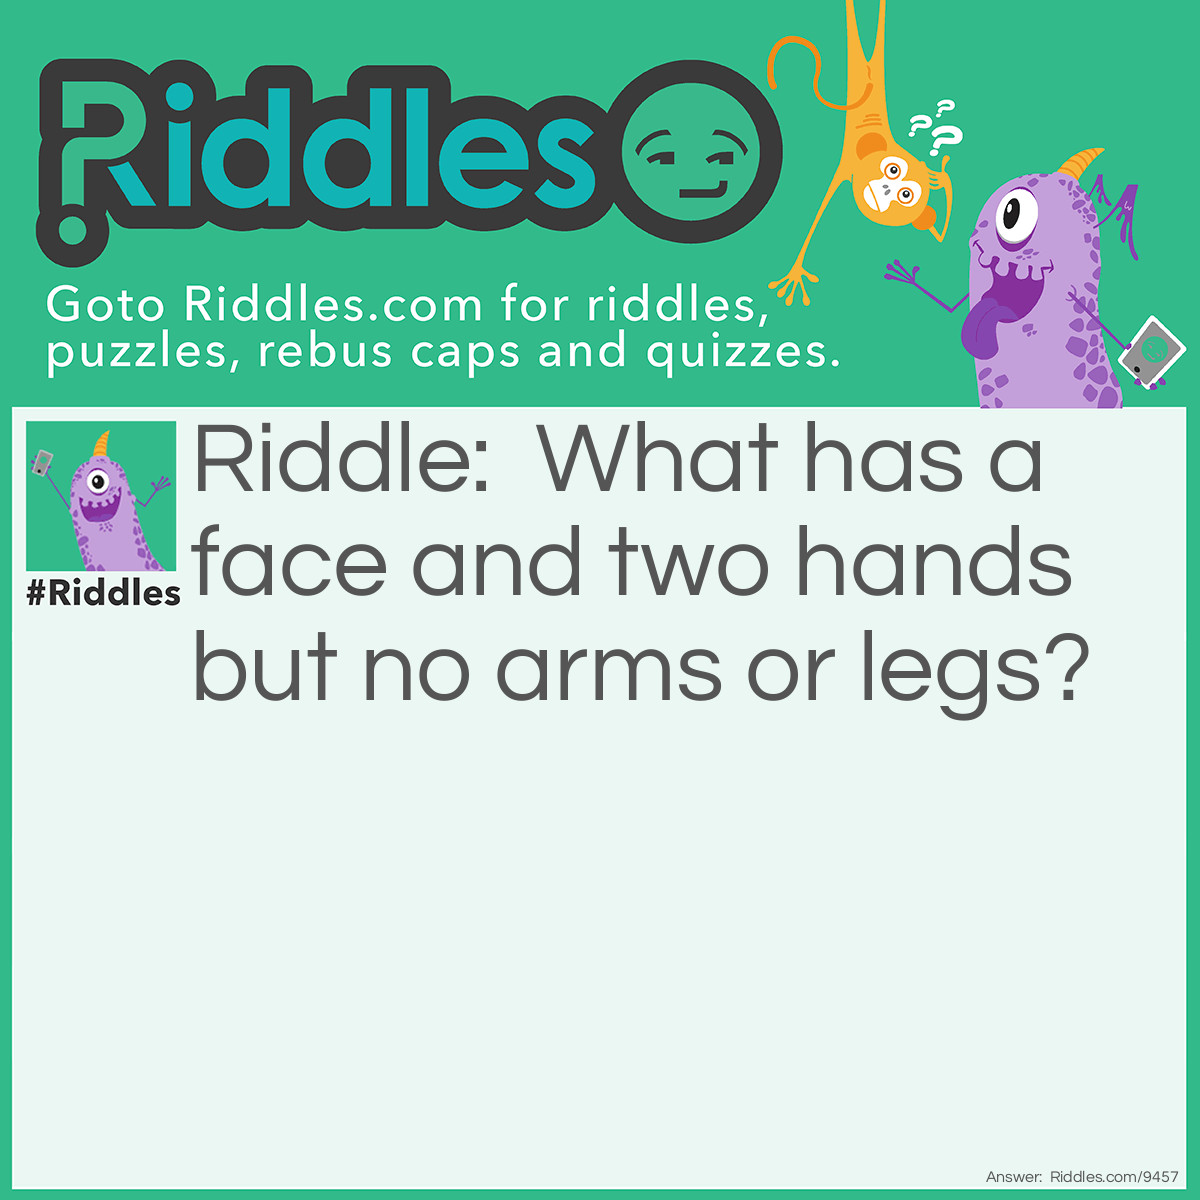 Riddle: What has a face and two hands but no arms or legs? Answer: A clock.